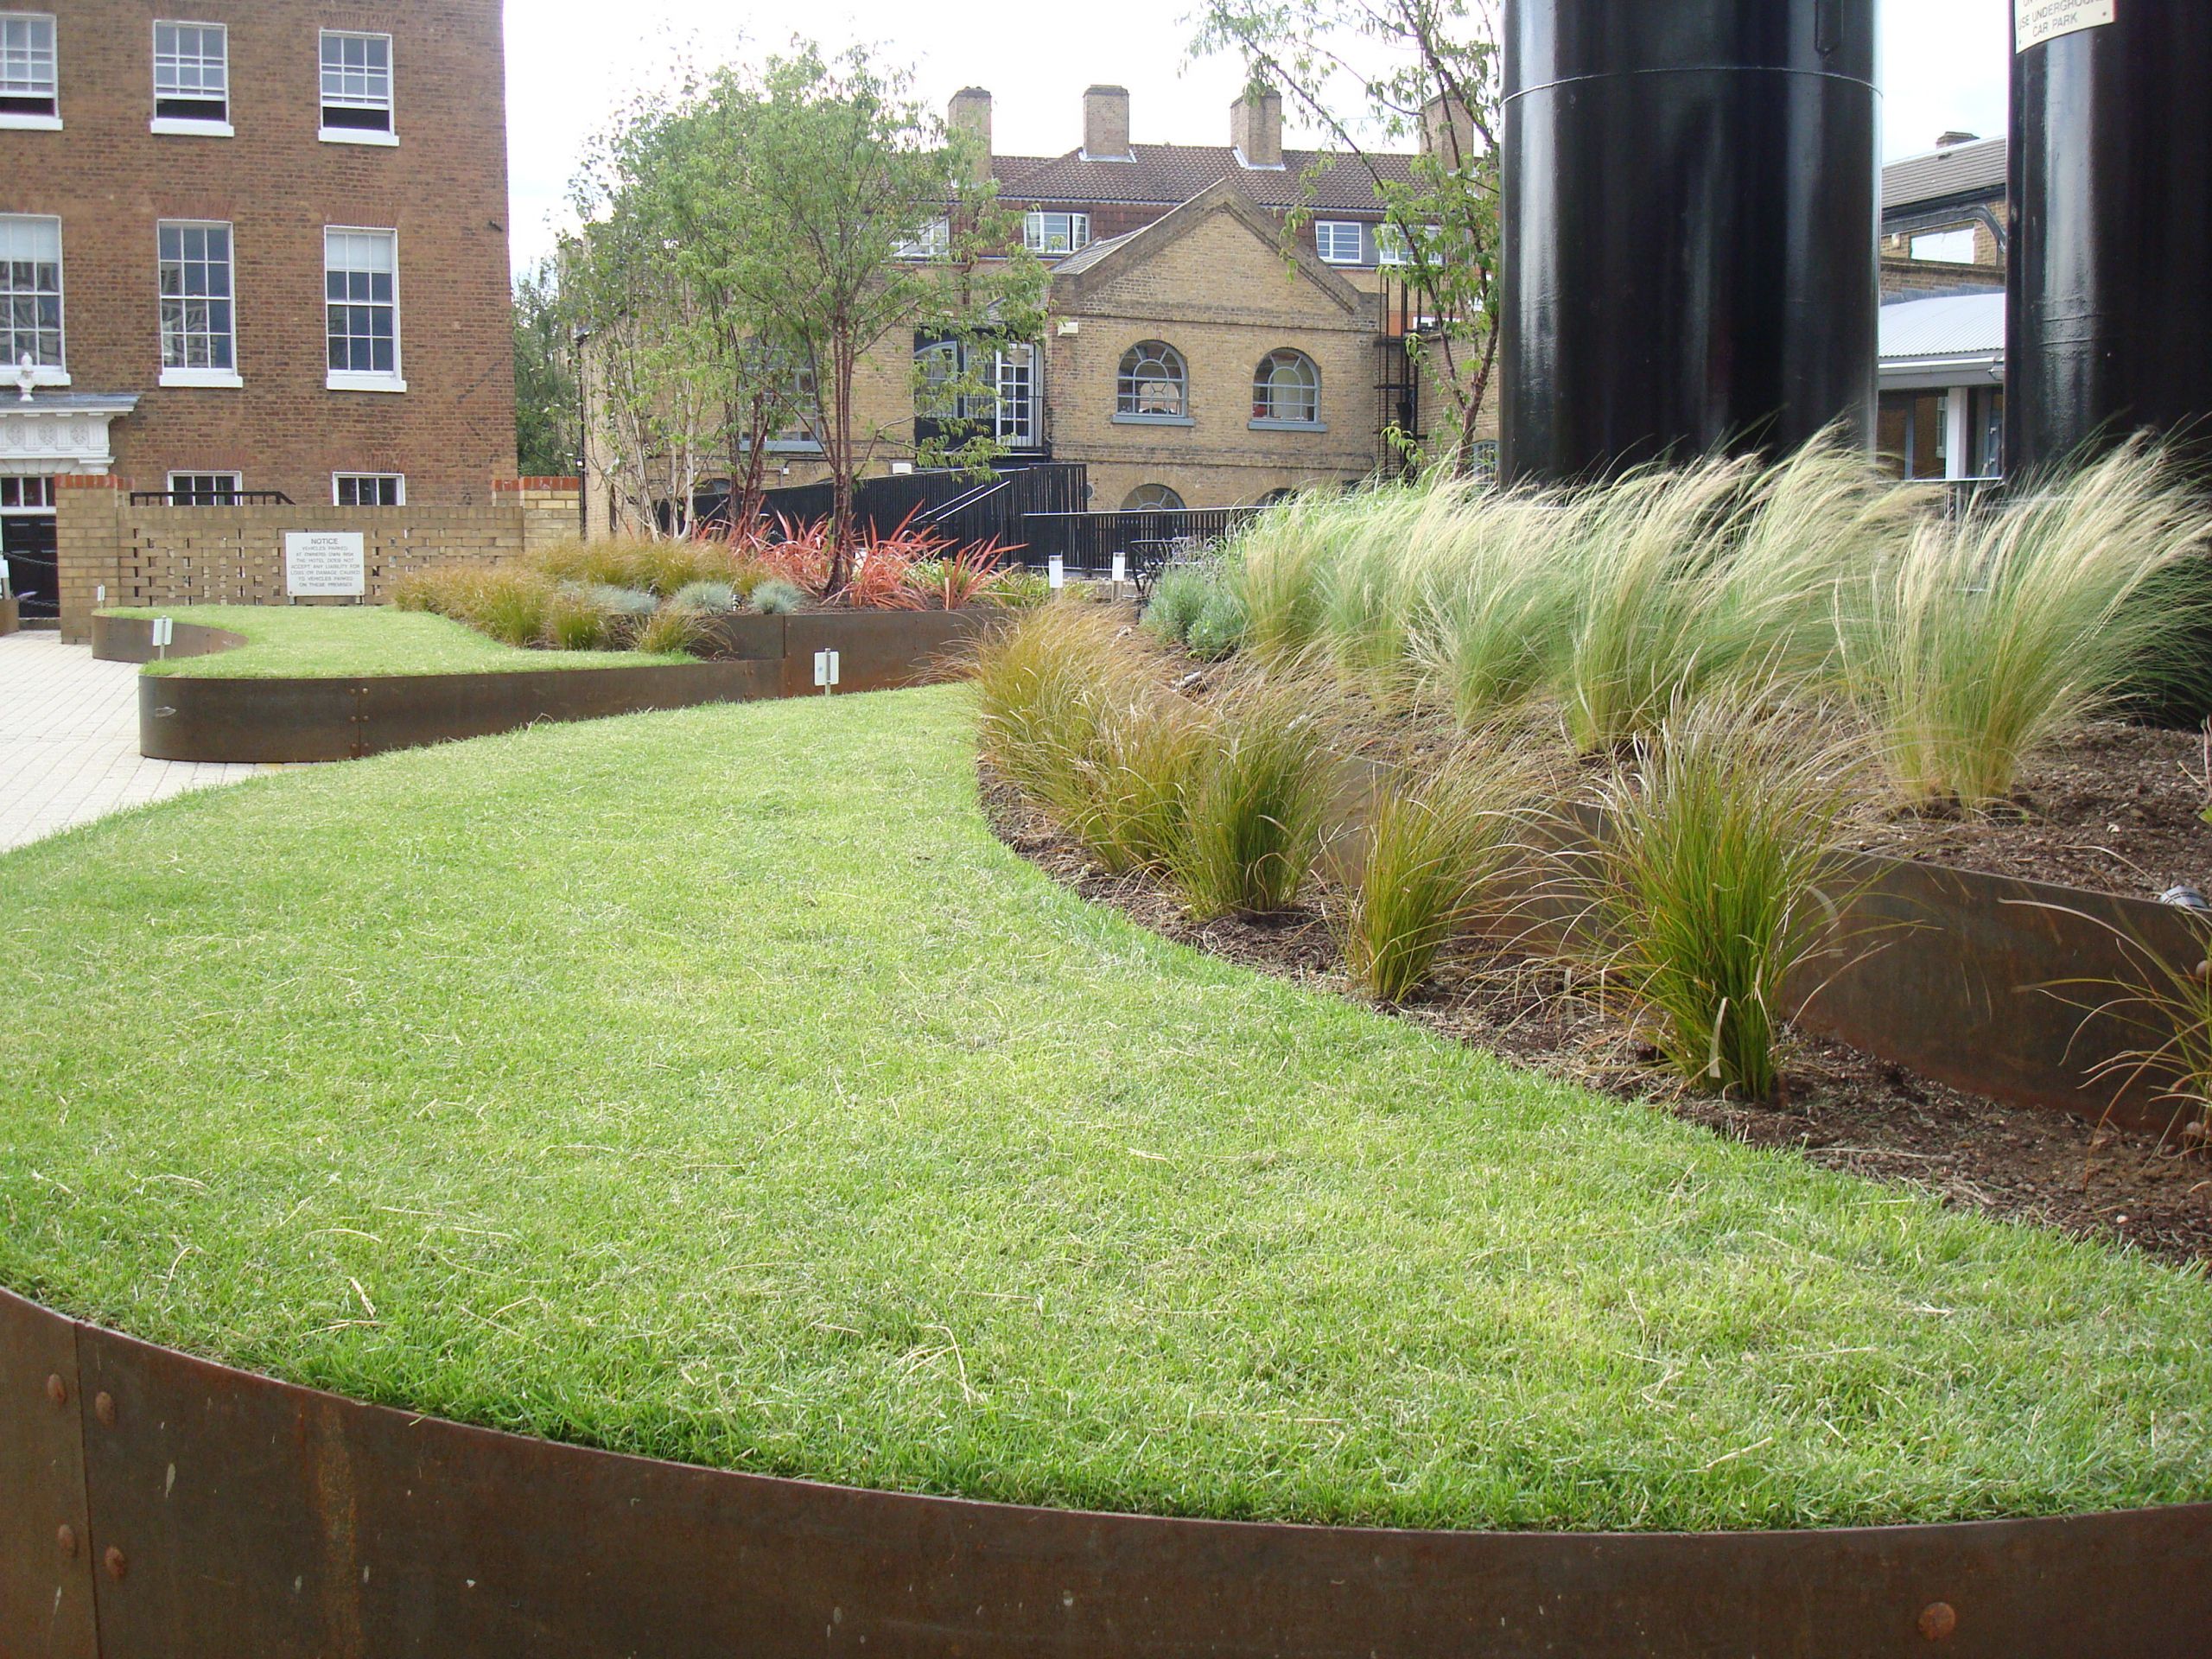 Commercial Grade Steel Landscape Edging
 Outdoors Your Garden Look Awesome With Corten Steel